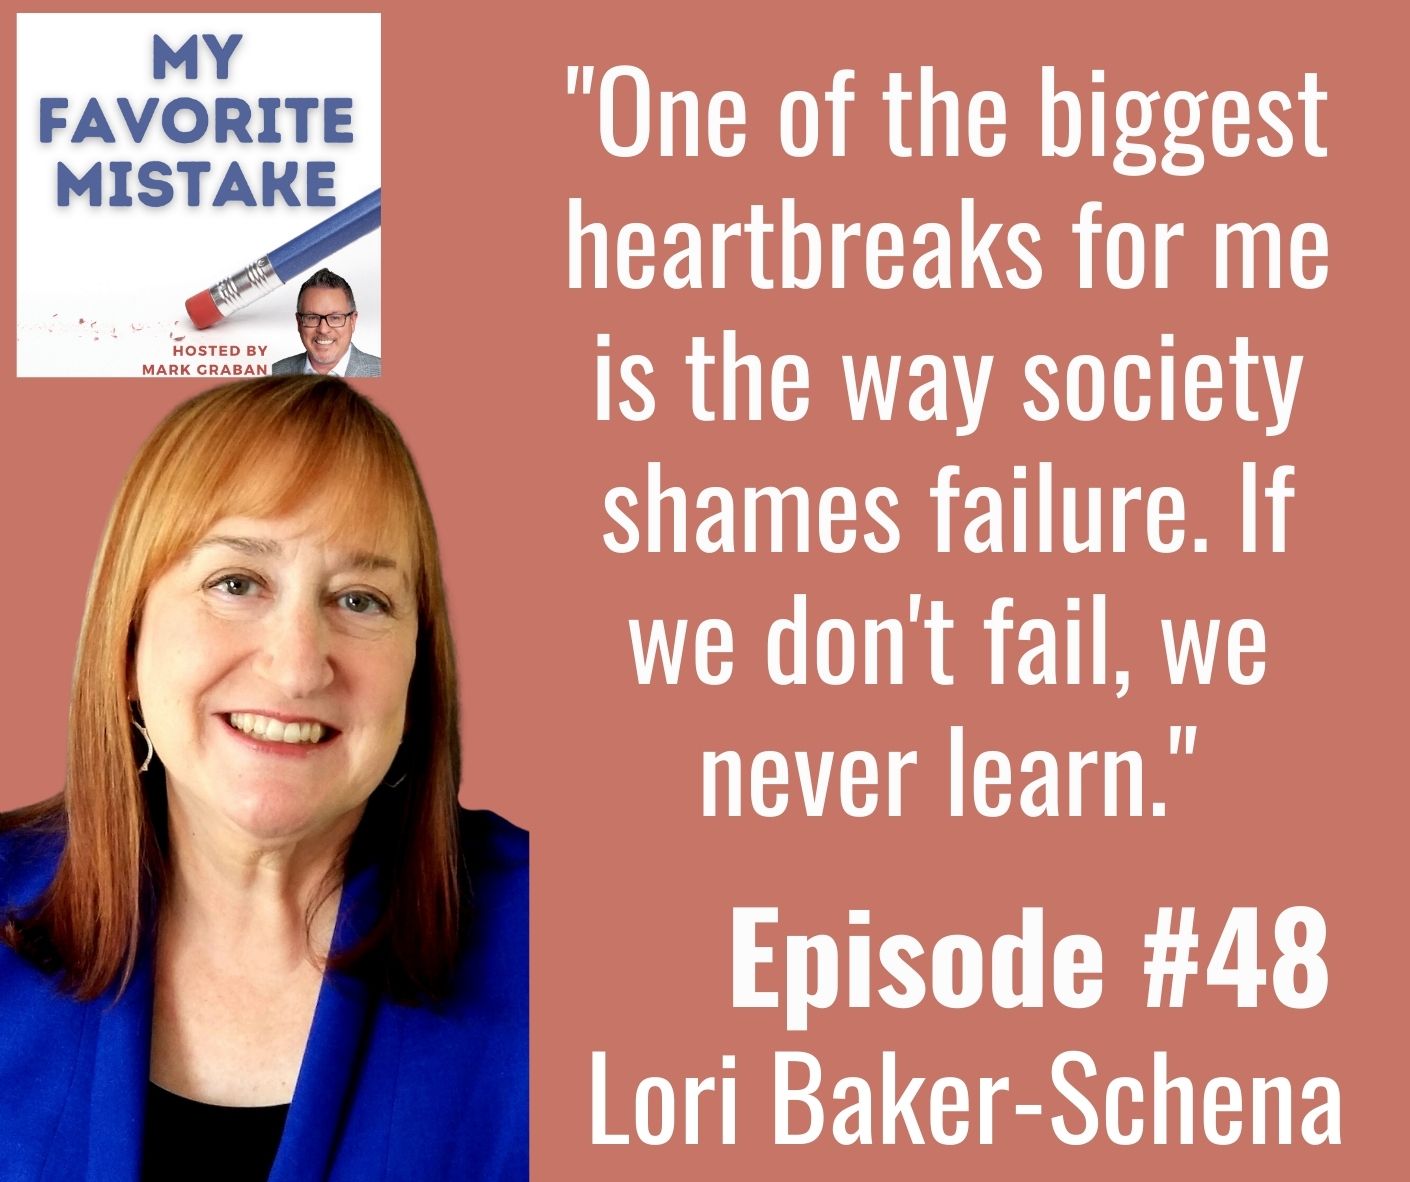 "One of the biggest heartbreaks for me is the way society shames failure. If we don't fail, we never learn."